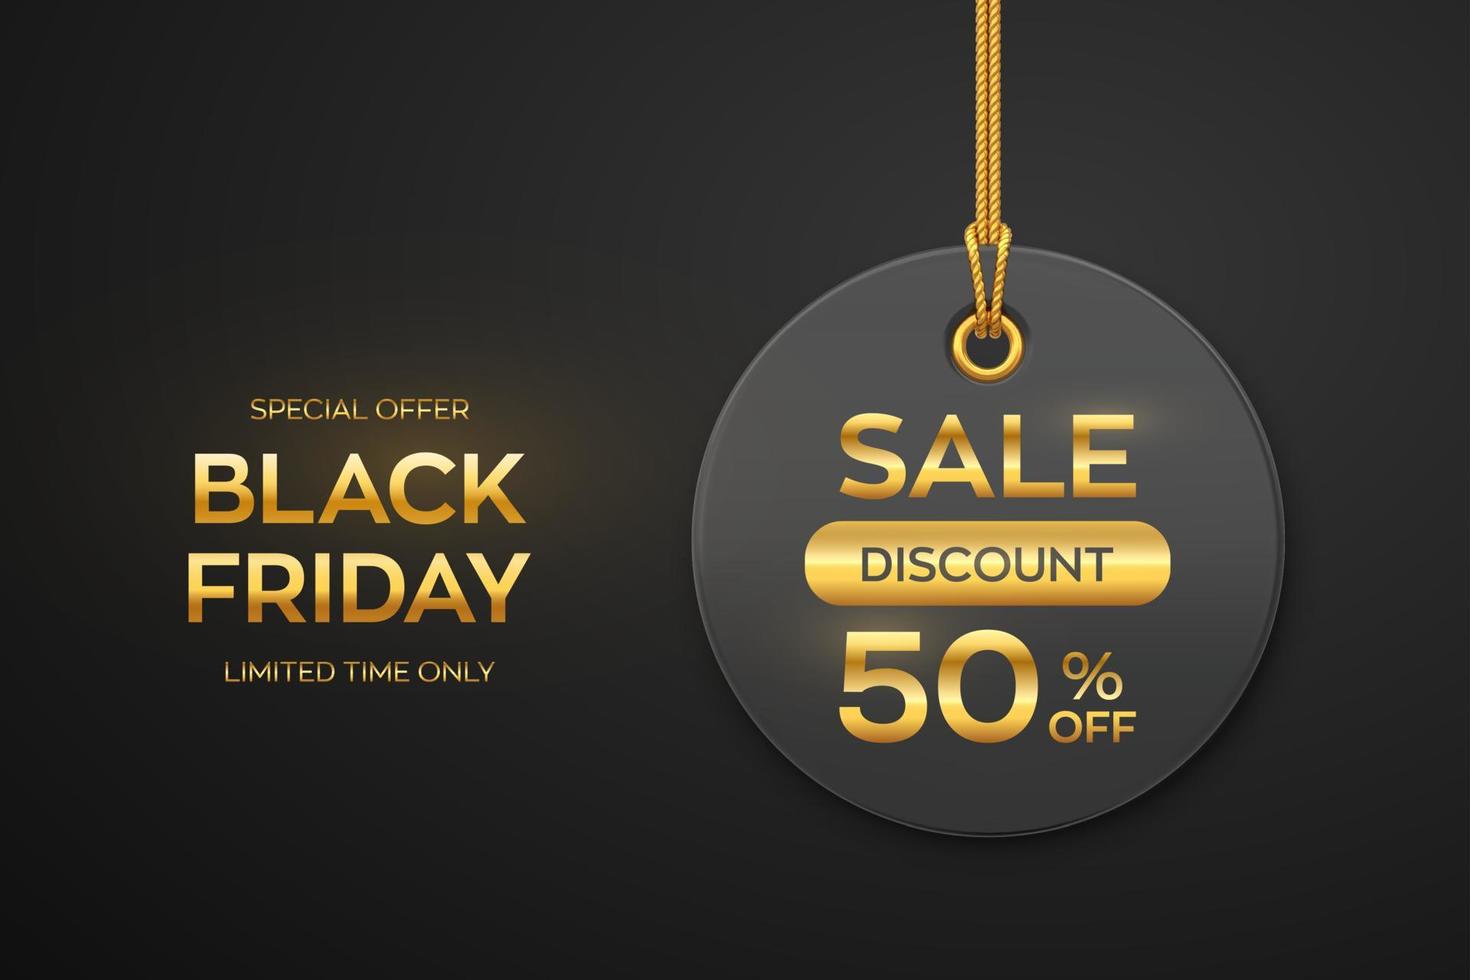 Black Friday sale price tag. Black tag hanging on gold rope. Discount label on black background. Black friday design, advertising, marketing price tag. Realistic 3D vector illustration.